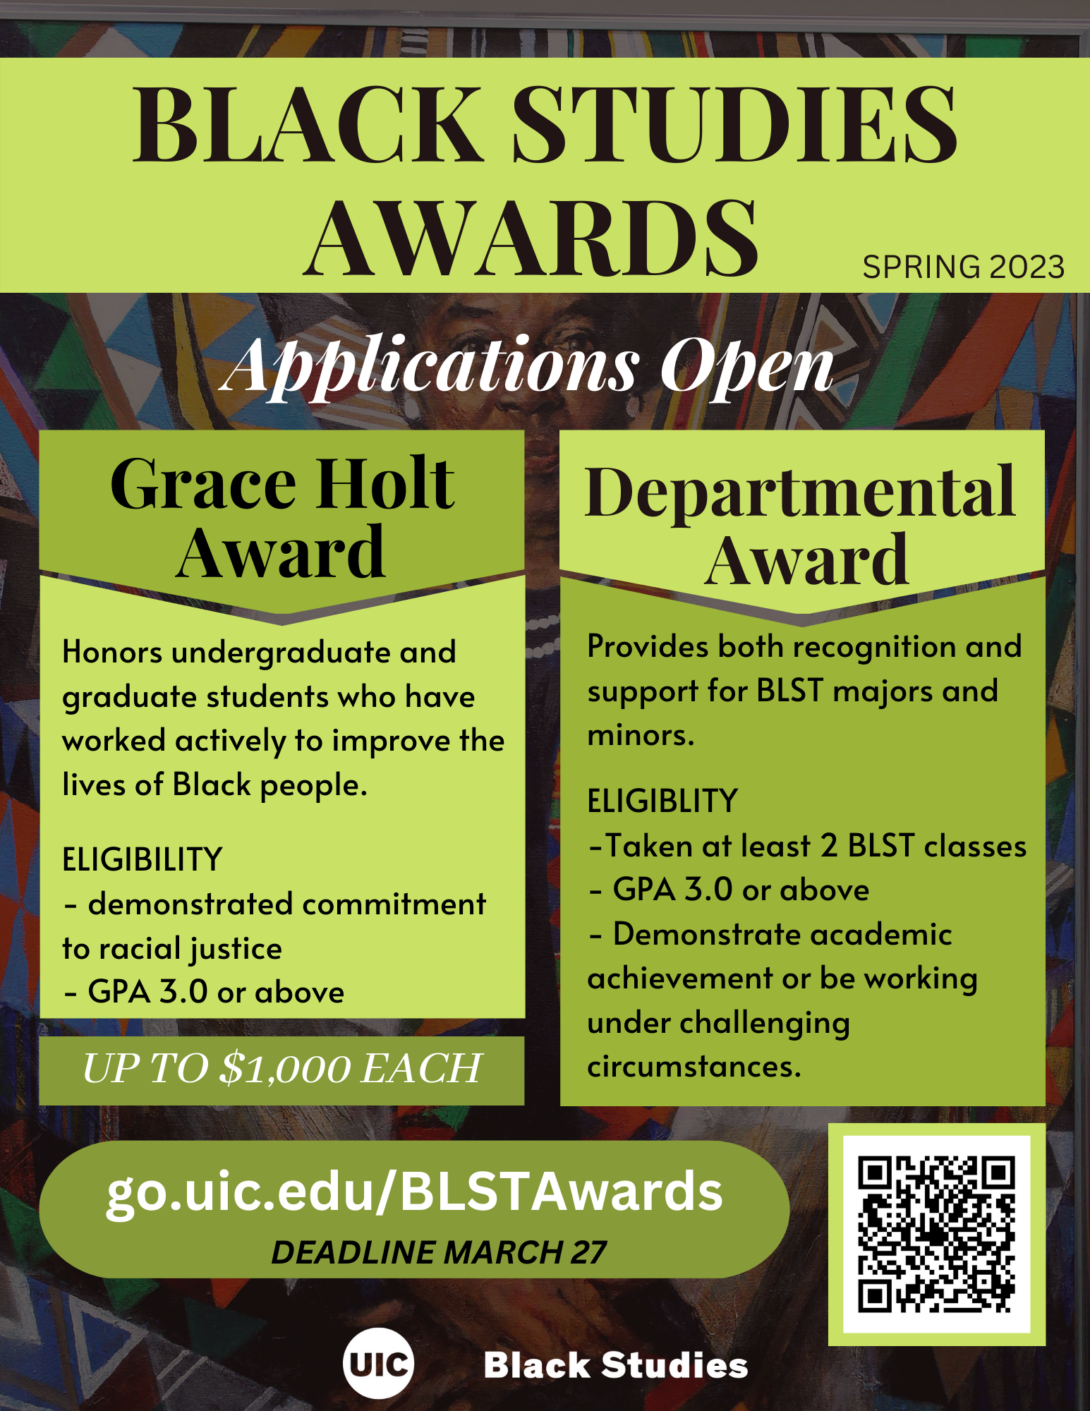 Event flyer. Colorful portrait of a woman in the background. Title read Black Studies Award in large font against green background. Two green rectangles with informational next to each other in the middle of the flyer. Department logo at the bottom of flyer.